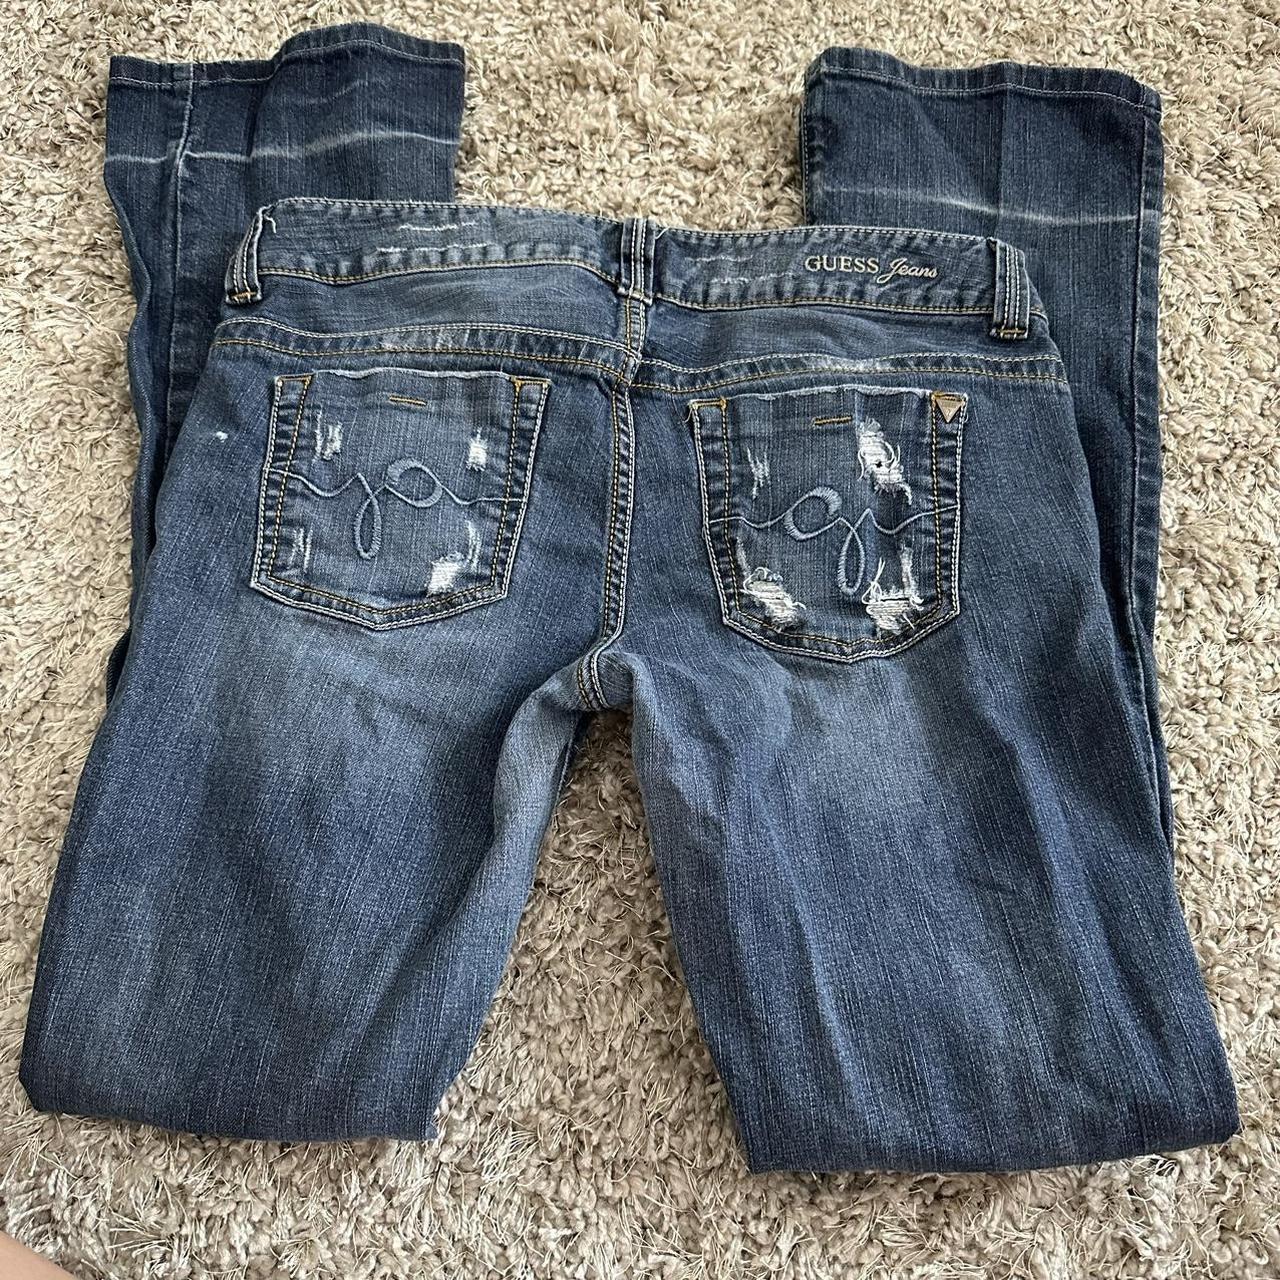 Vintage low rise, flair jagged jeans Size 31 No... - Depop